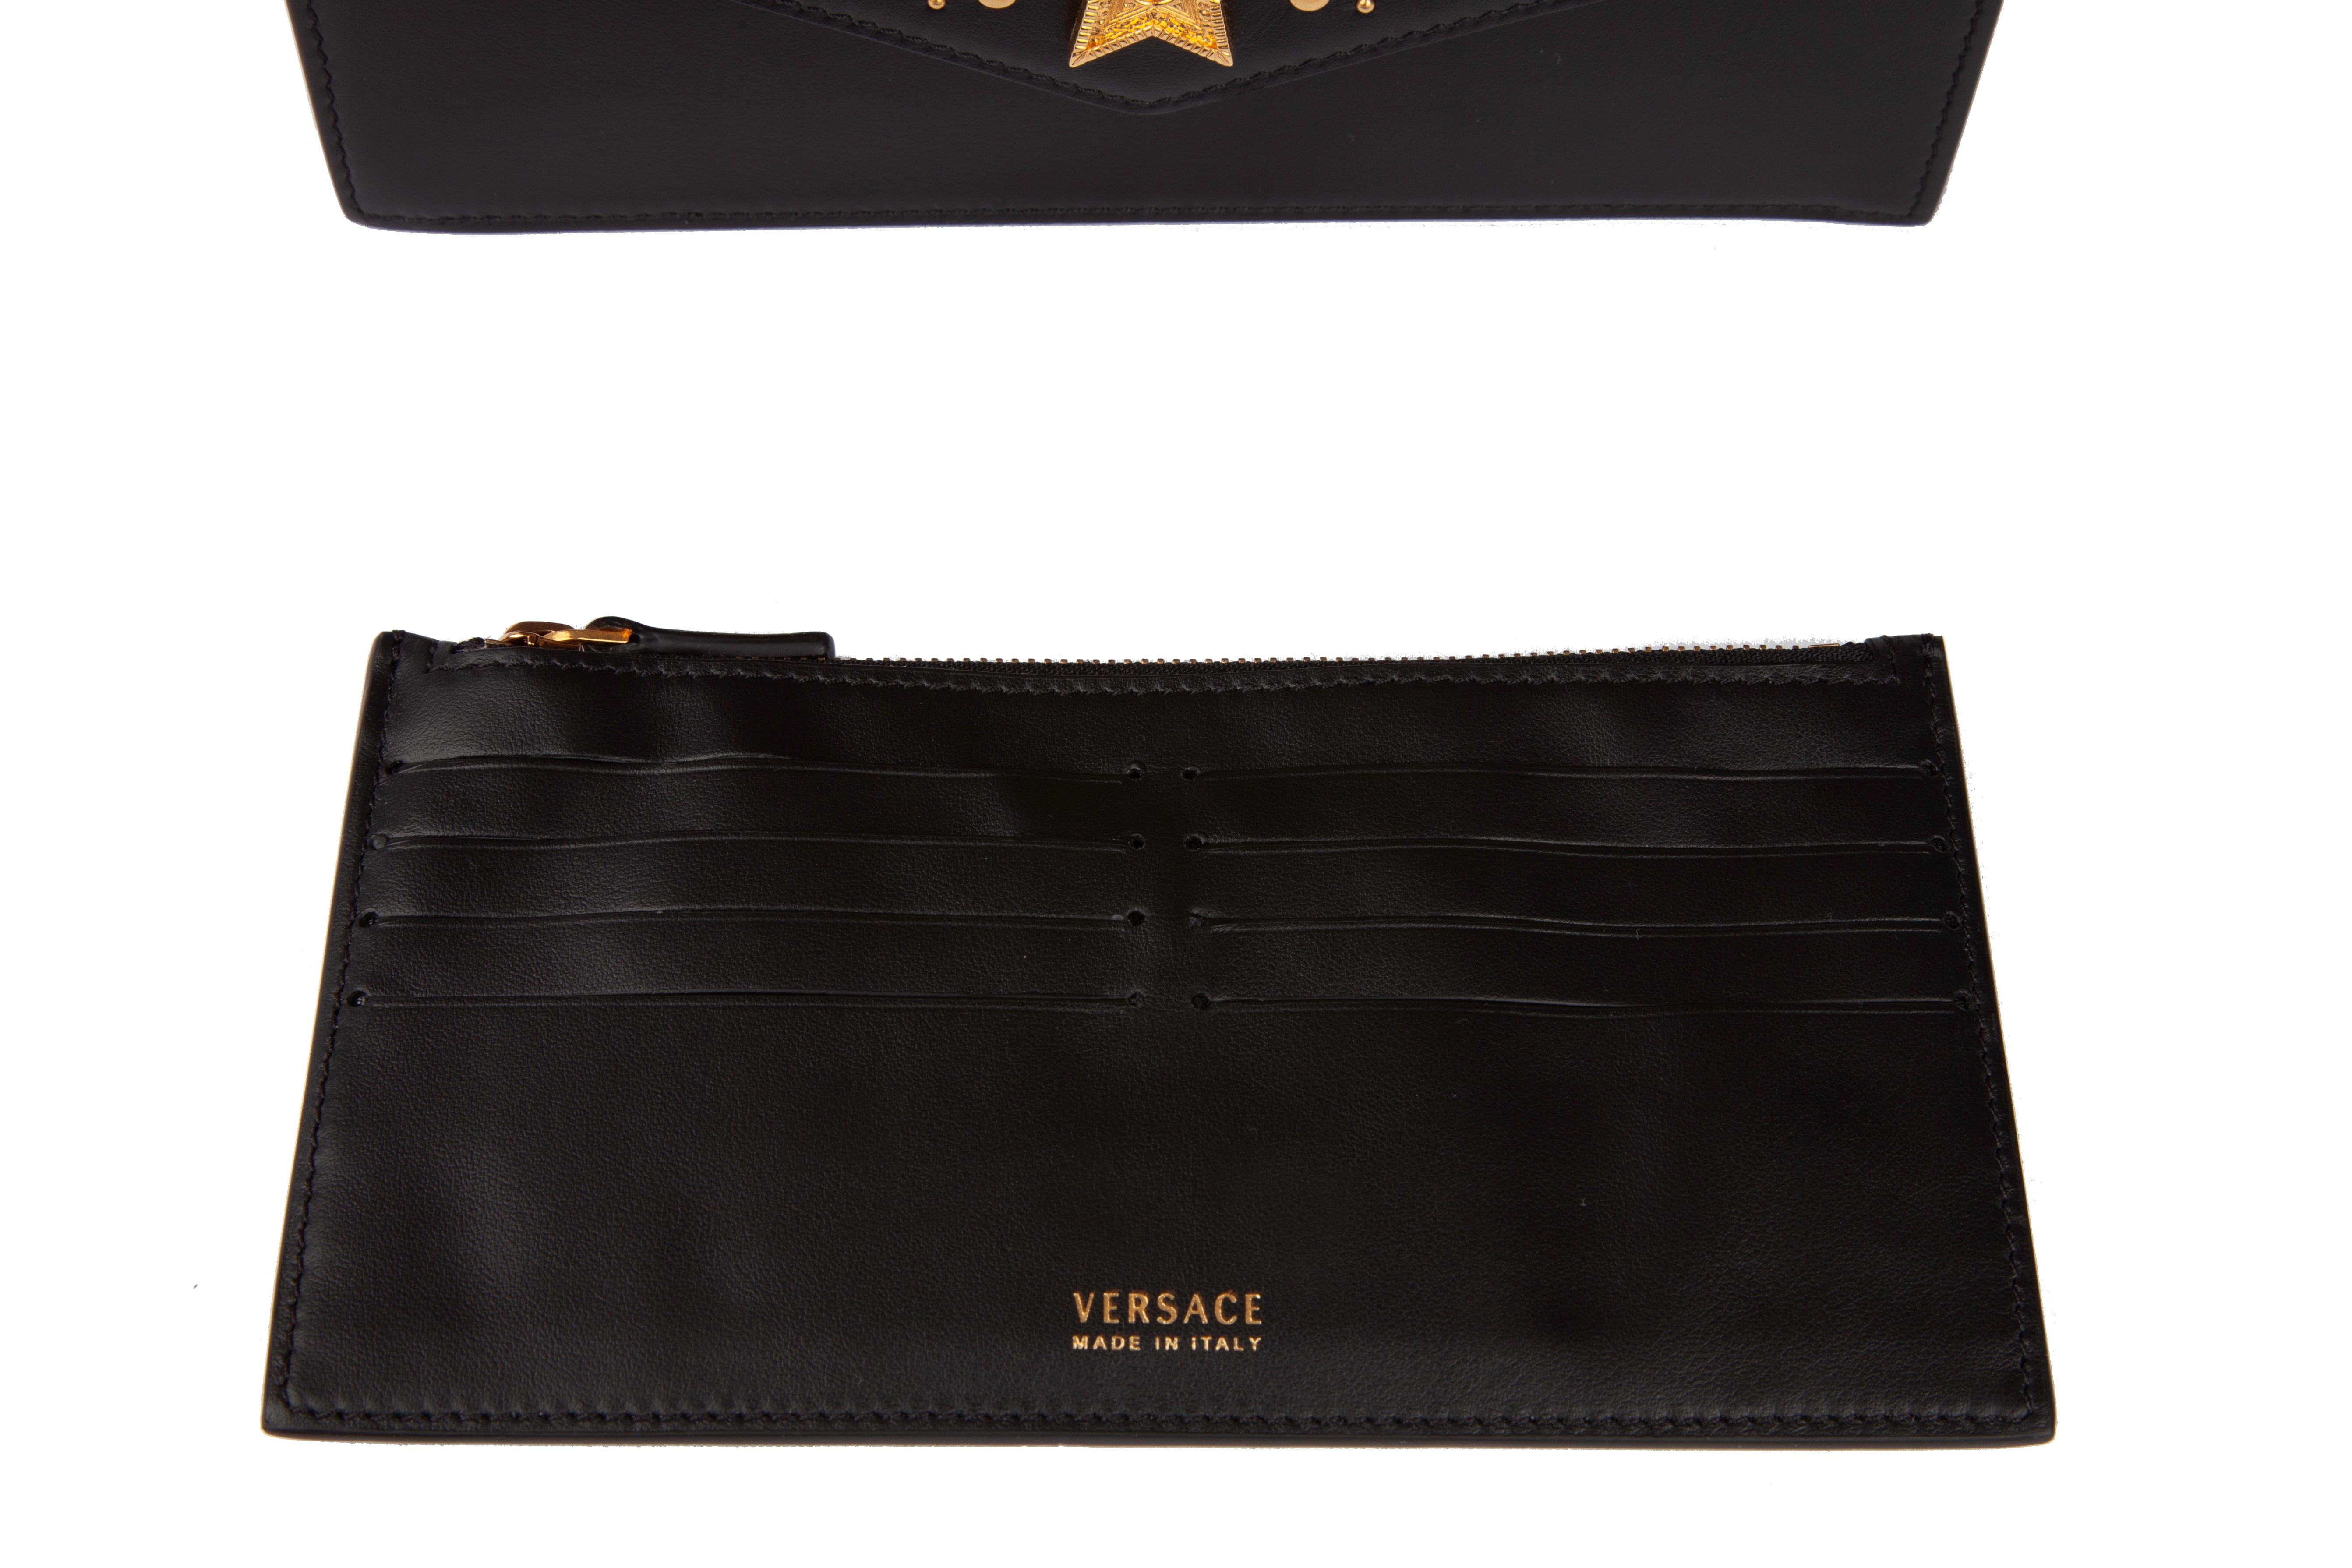 Versace Western Studded Black Leather Clutch Evening Bag with Gold Tone Chain 1